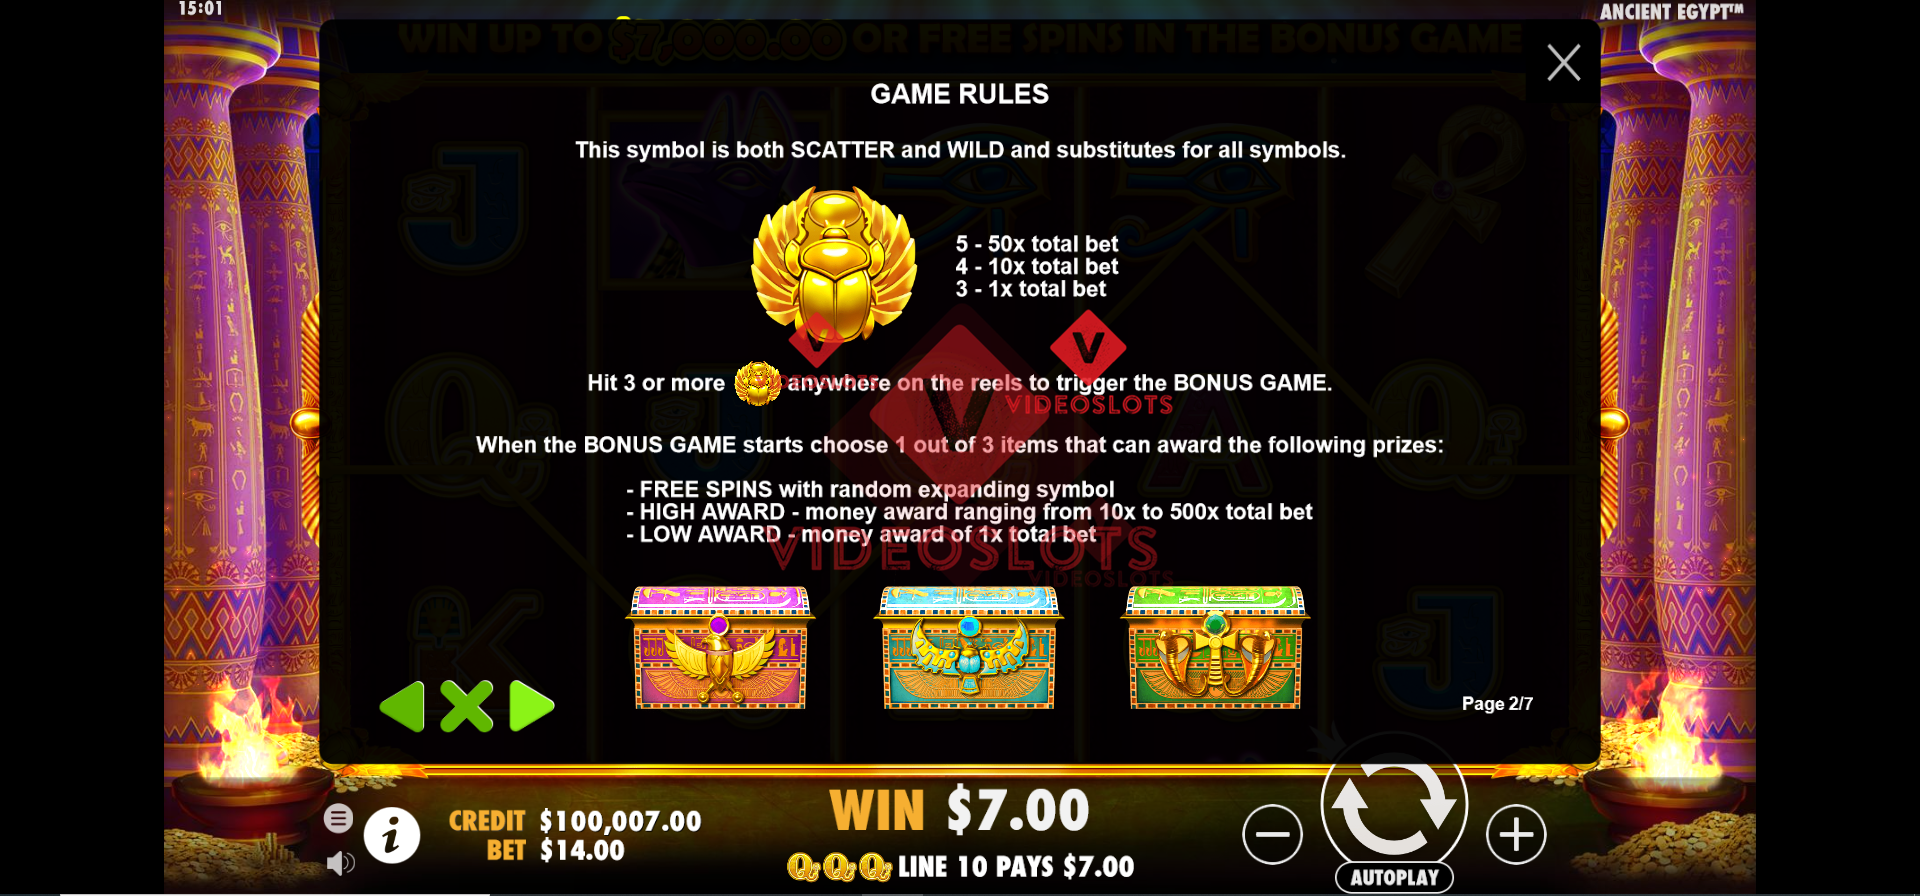 Game Rules for Ancient Egypt slot by Pragmatic Play